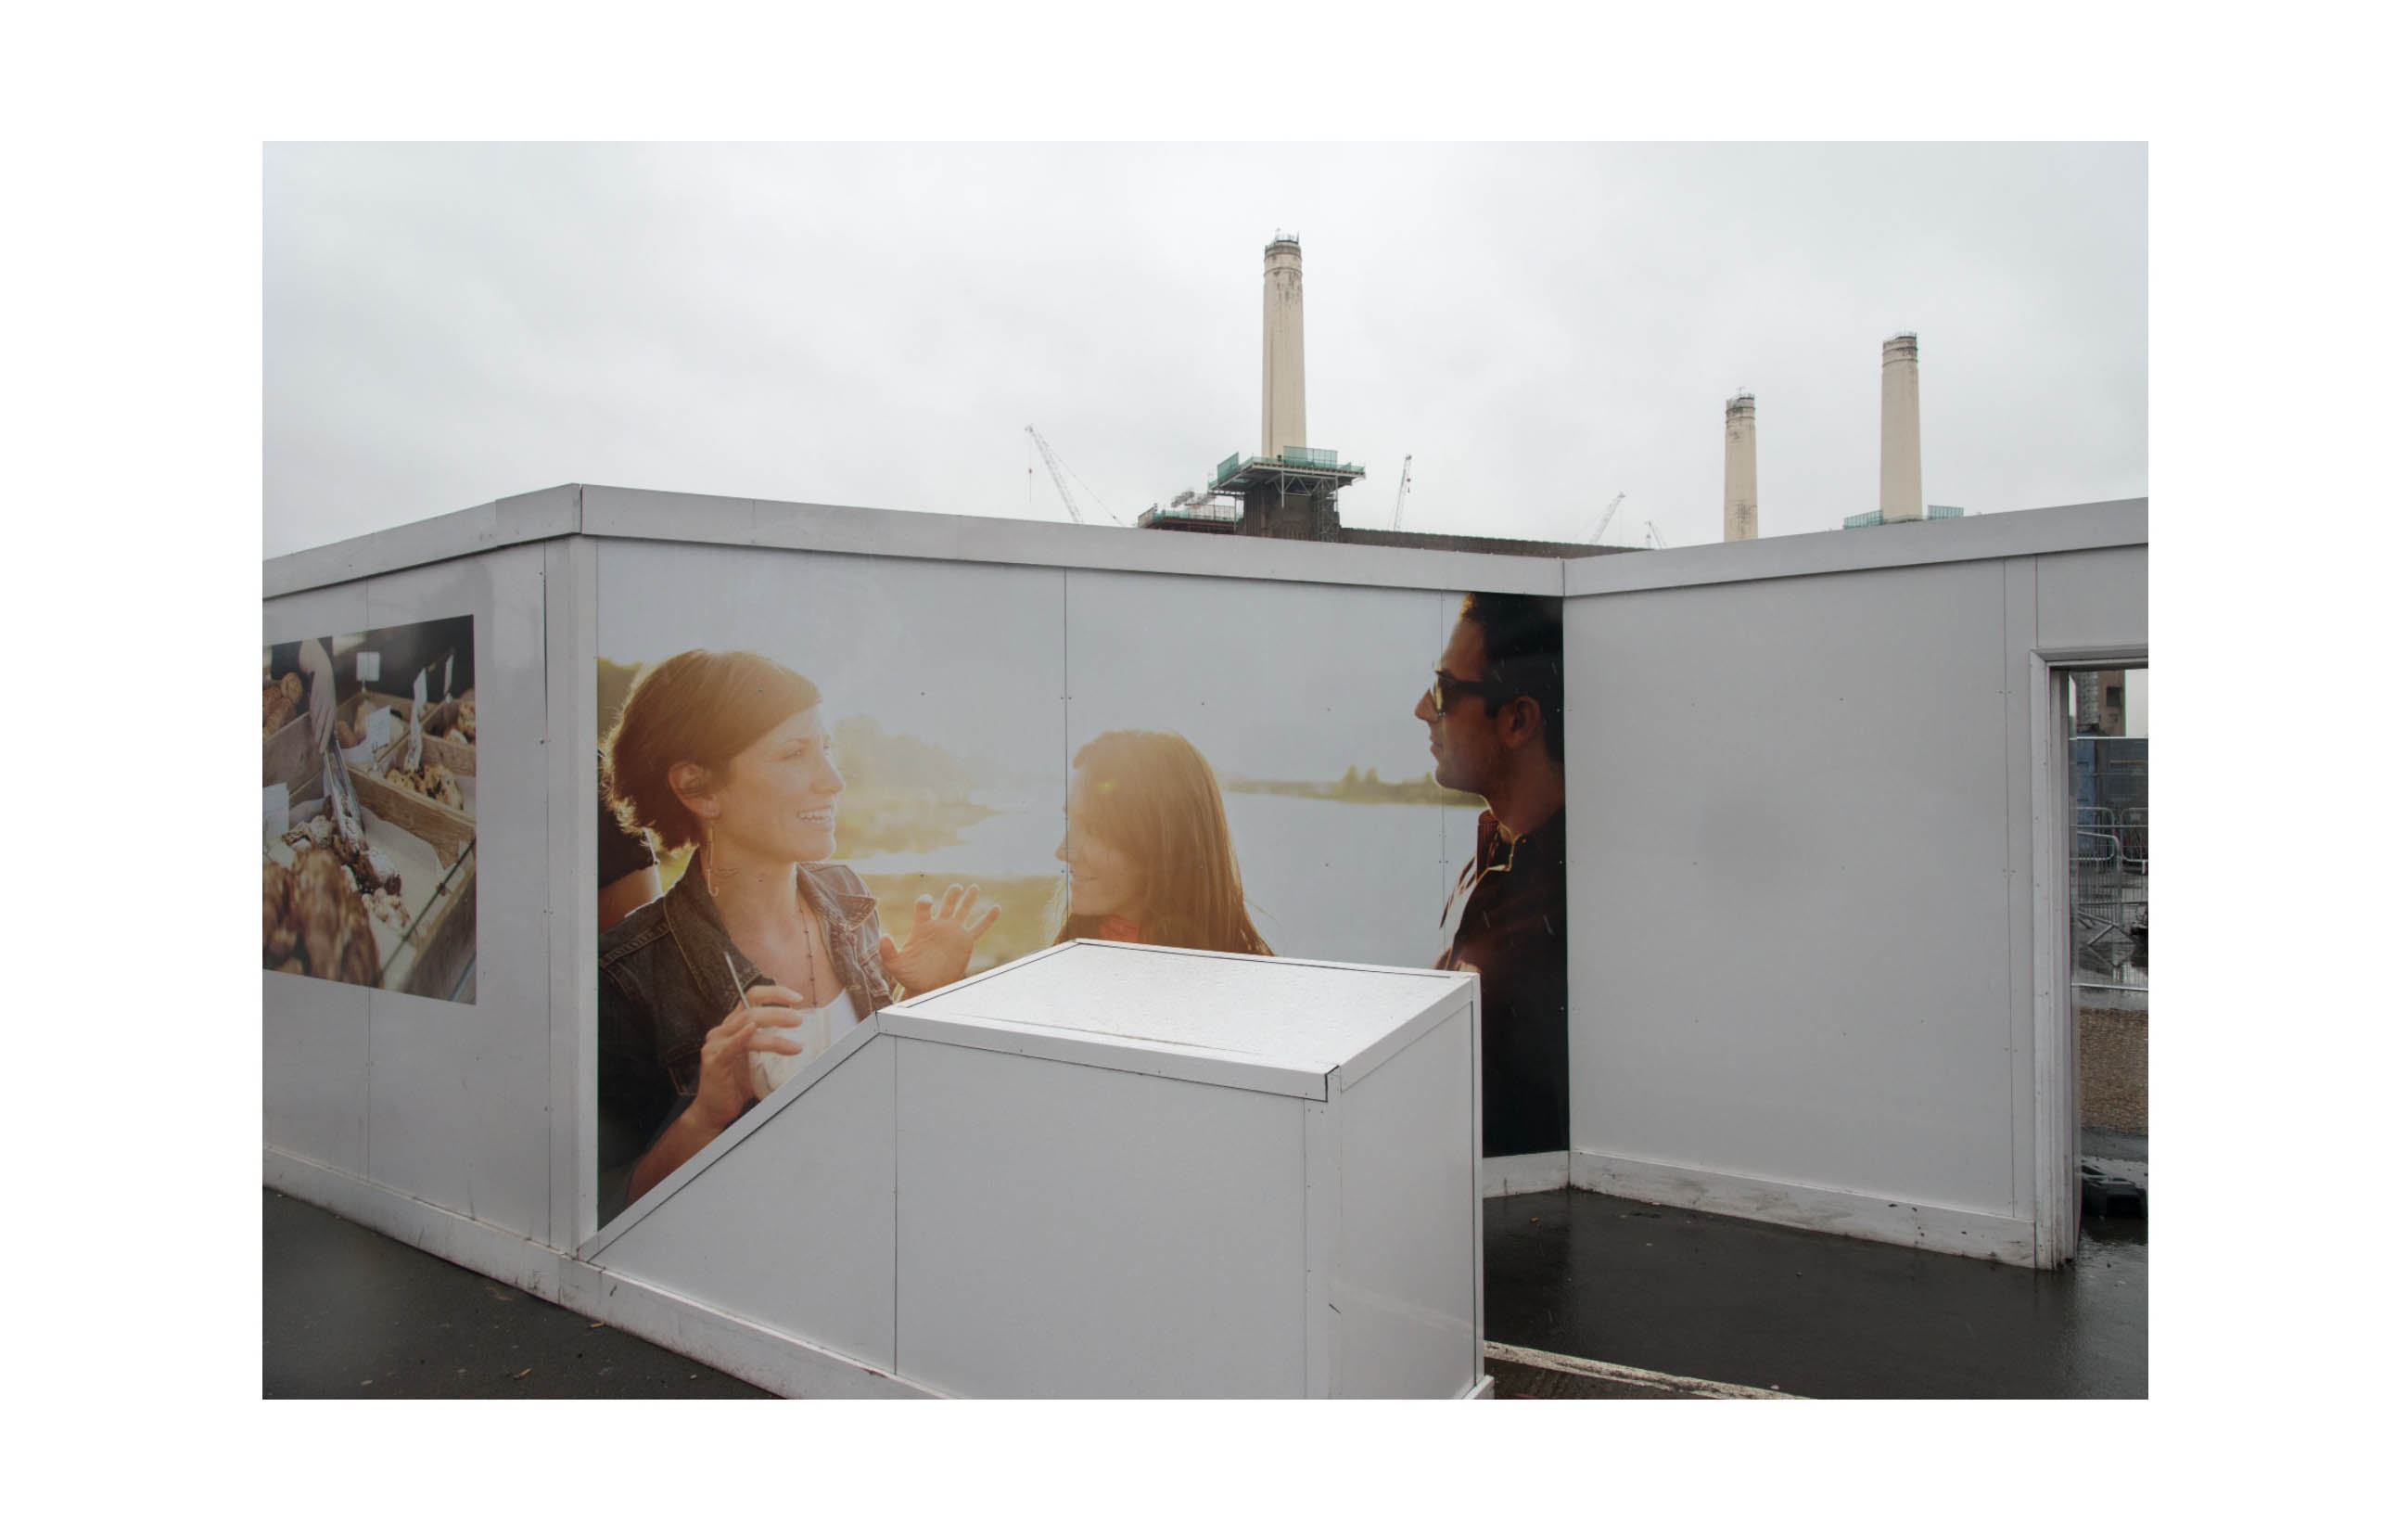 A hoarding is illustrated with white people discussing something against a sunset, behind the hoarding Battersea Power Station can be seen